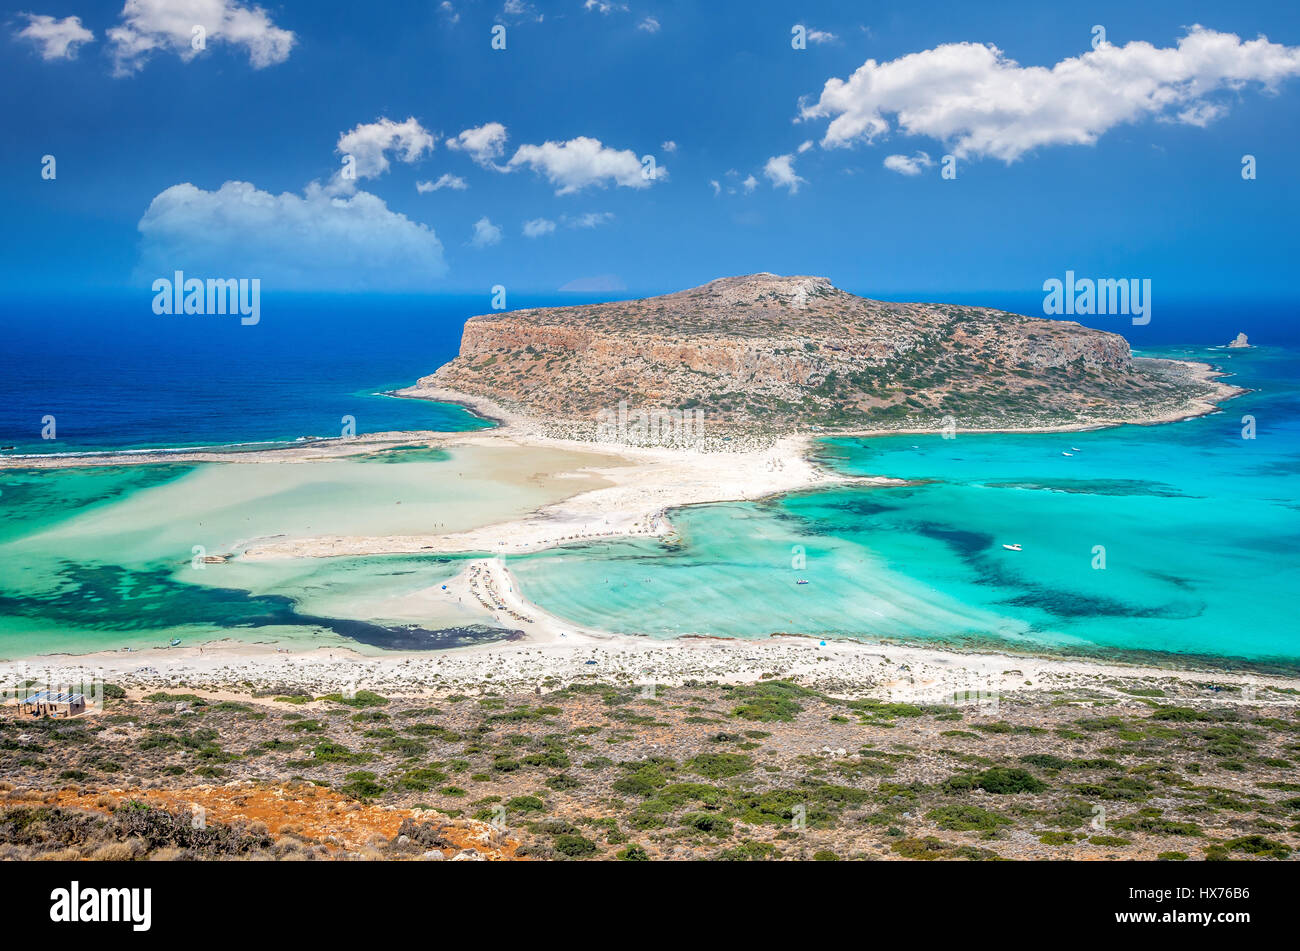 Balos lagoon on Crete island, Greece. Tourists relax and bath in crystal clear water of Balos beach. Stock Photo